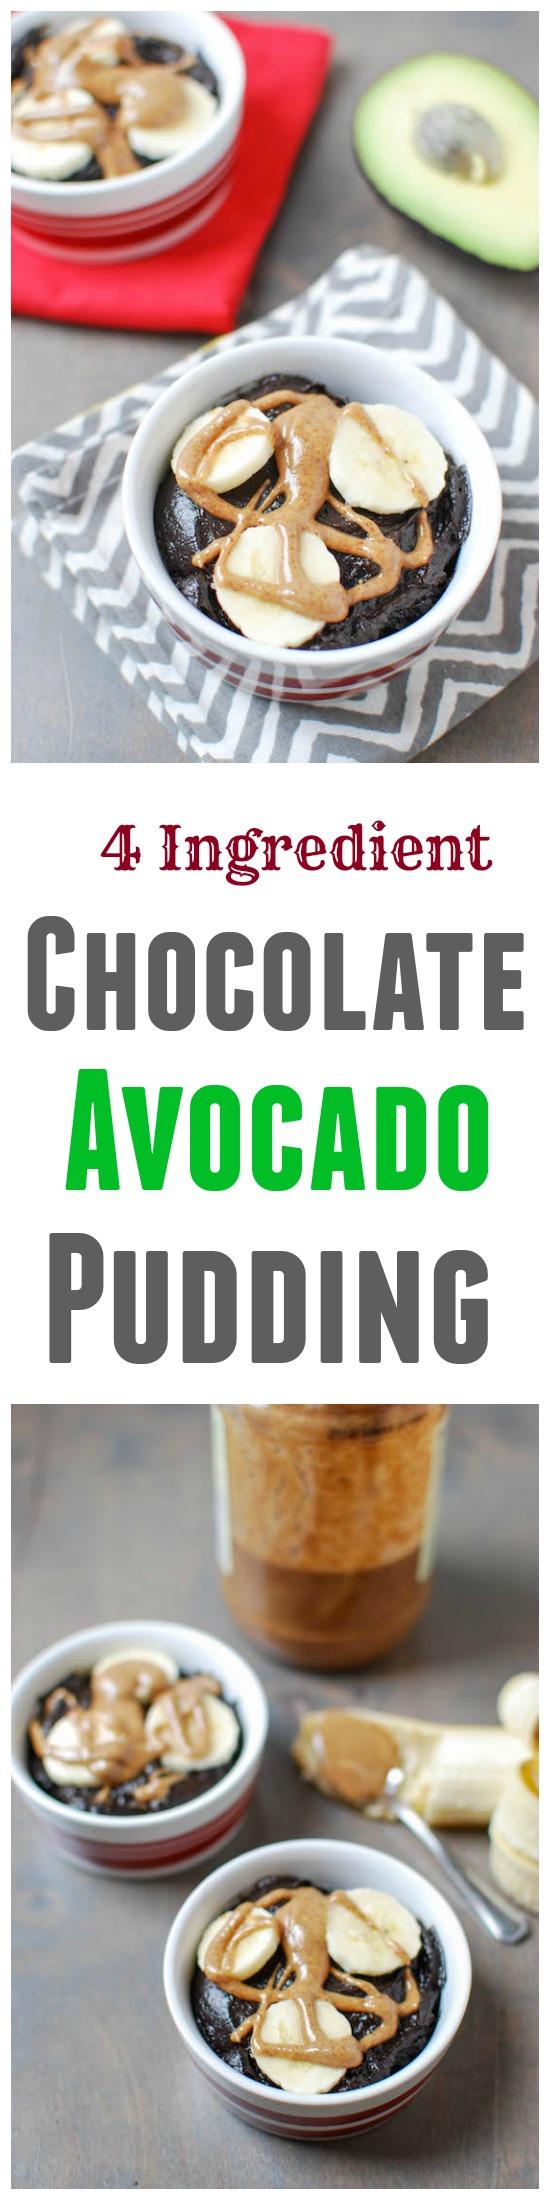 Nutrient dense and made with just four ingredients, this Chocolate Avocado Pudding makes a great snack or dessert!